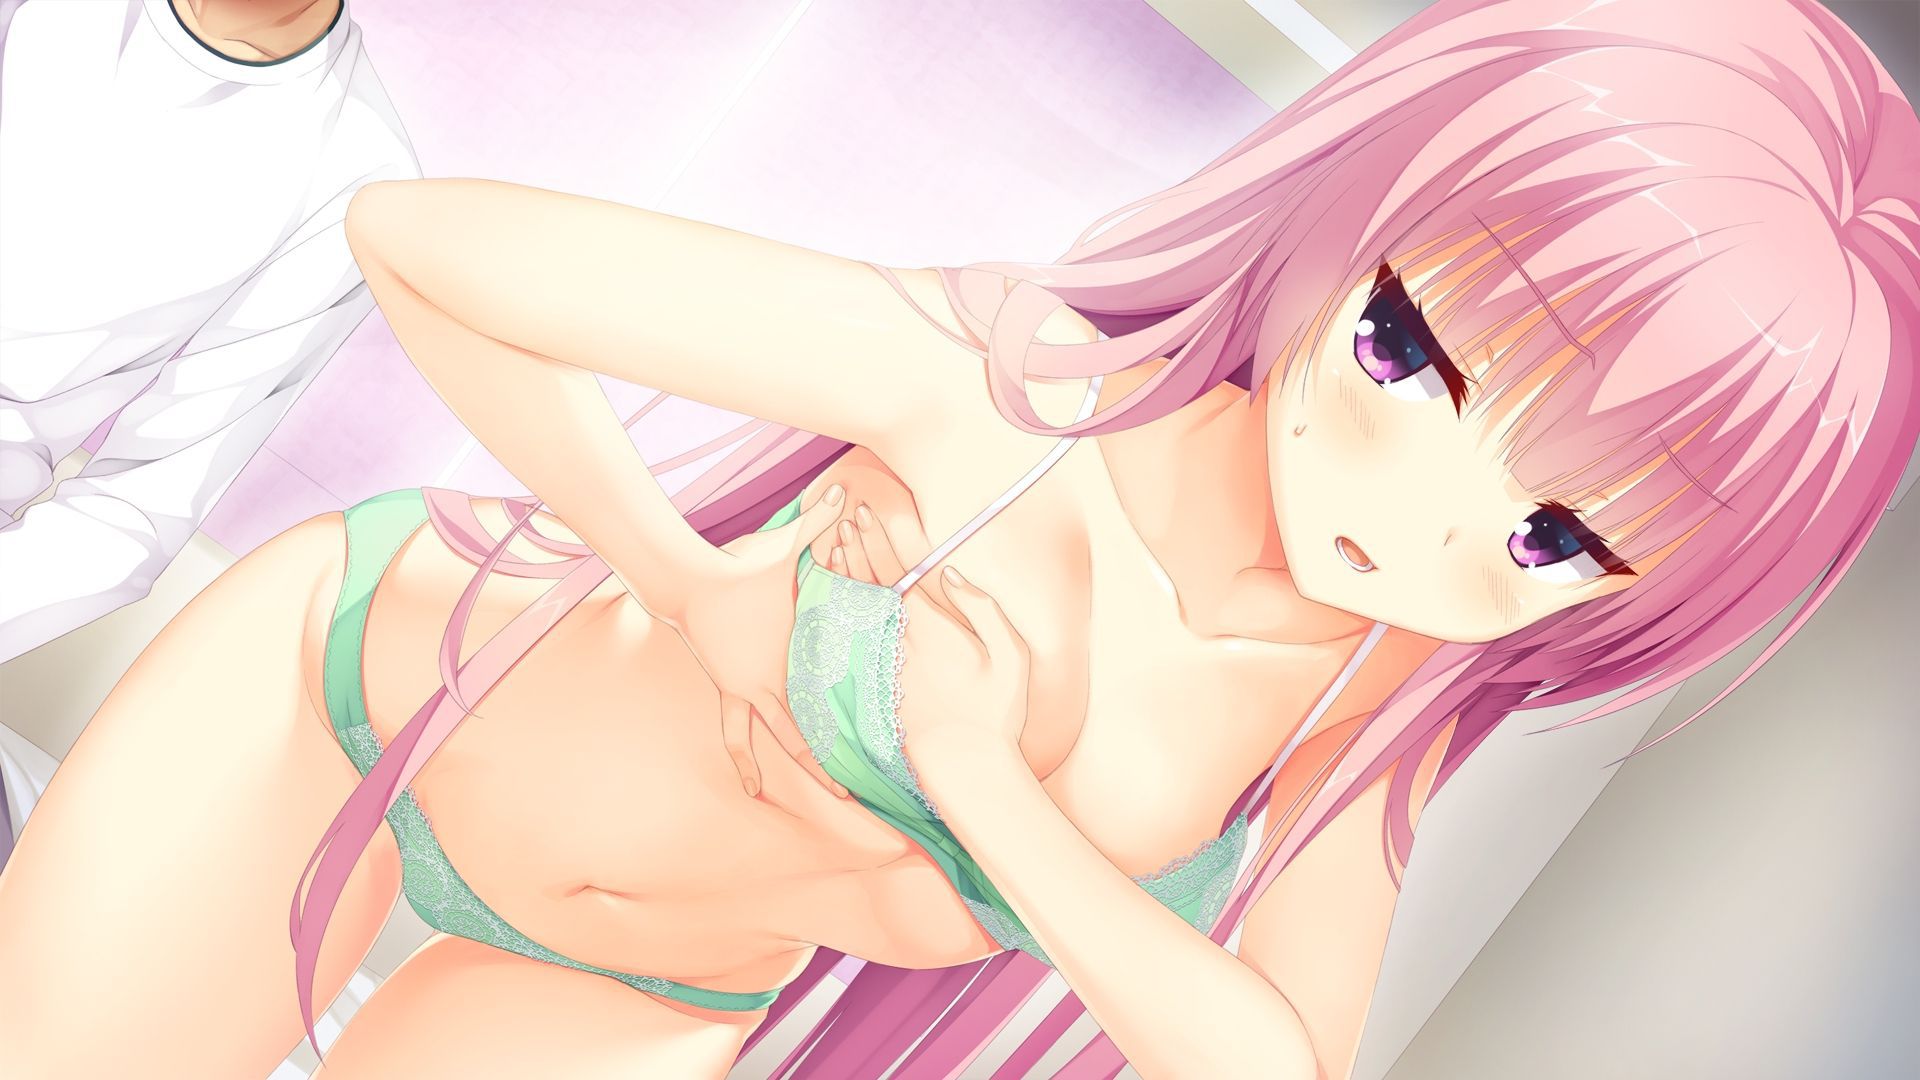 Erotic anime summary Erotic image of a girl who is too while wearing a bra [secondary erotic] 19